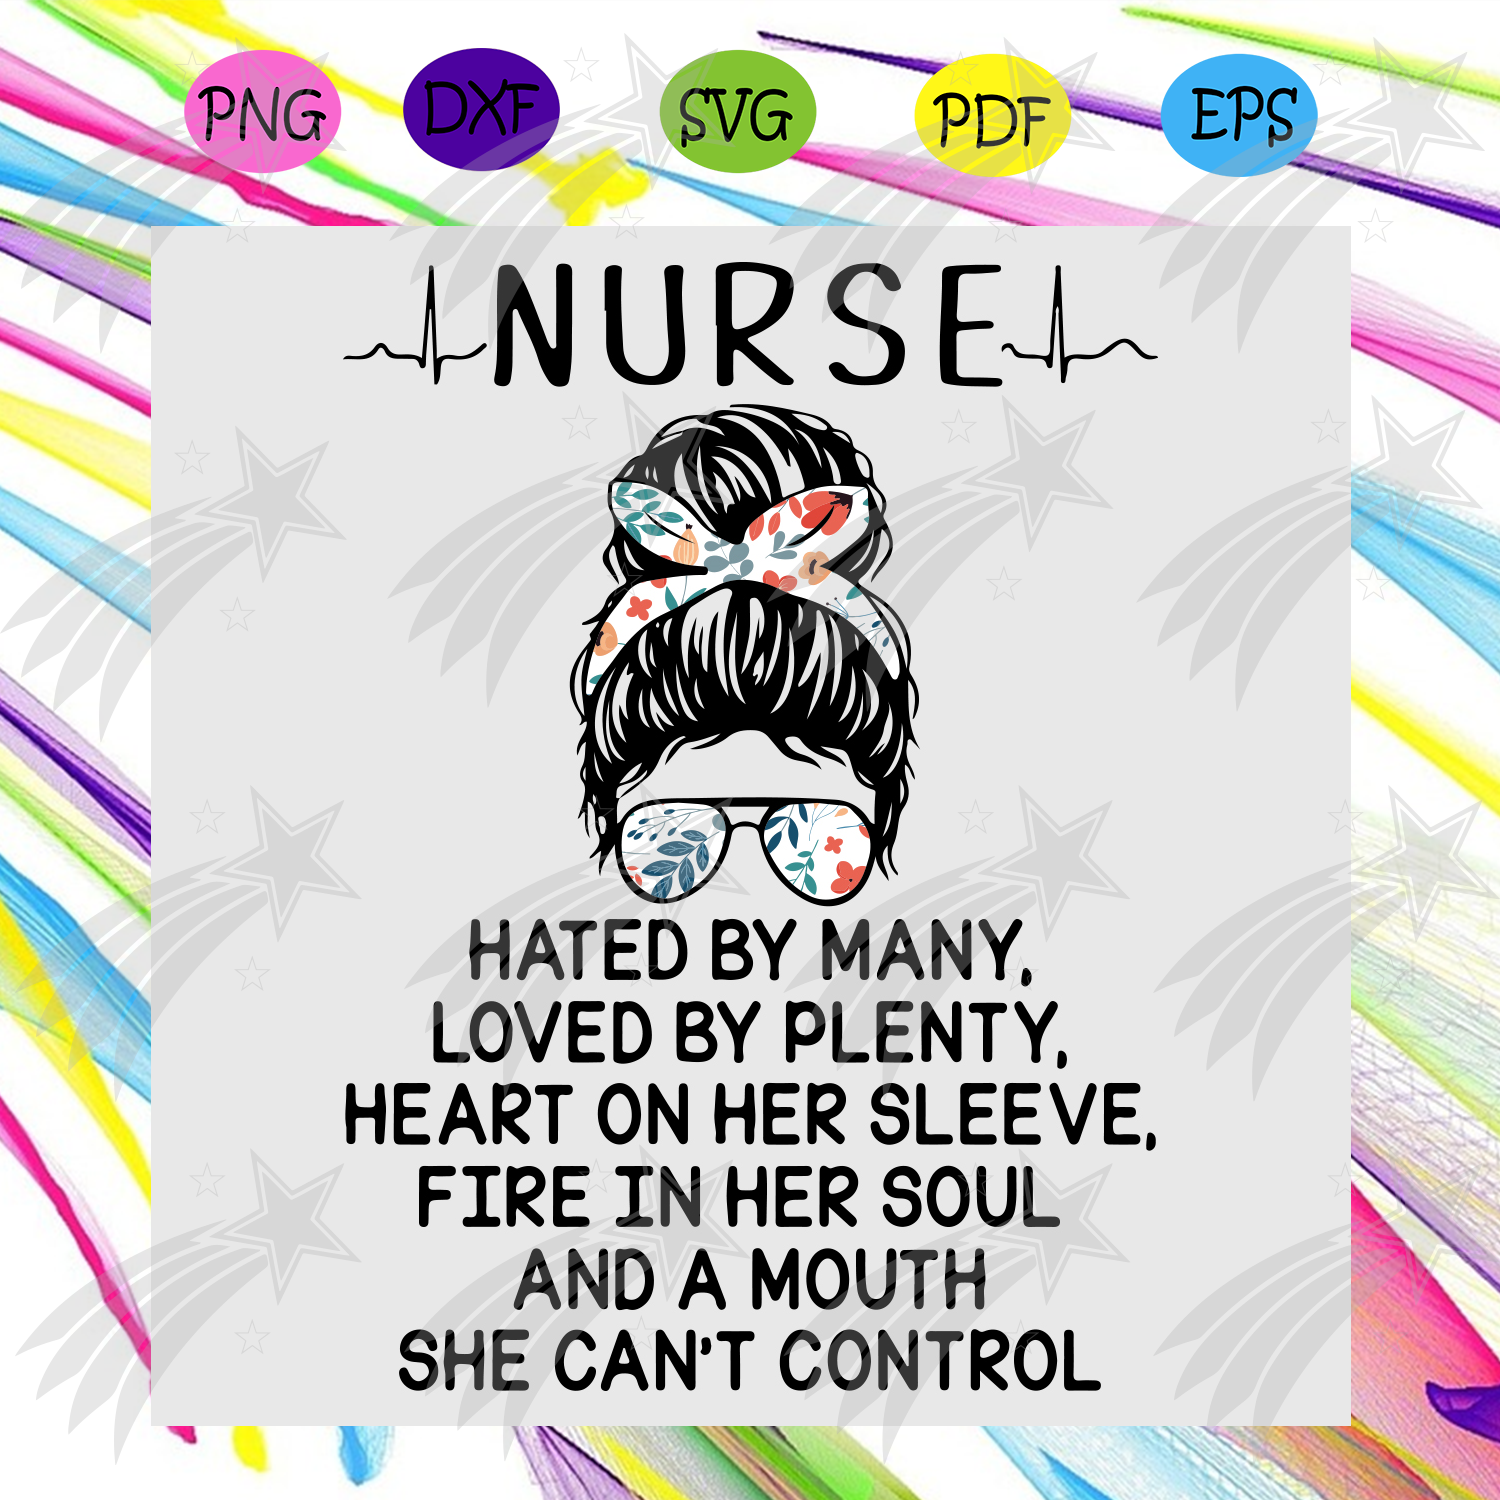 Download Nurse Hated By Manny Girl With Colorful Bun Svg Nurse Svg Nurse Day Svg Nurse Svg